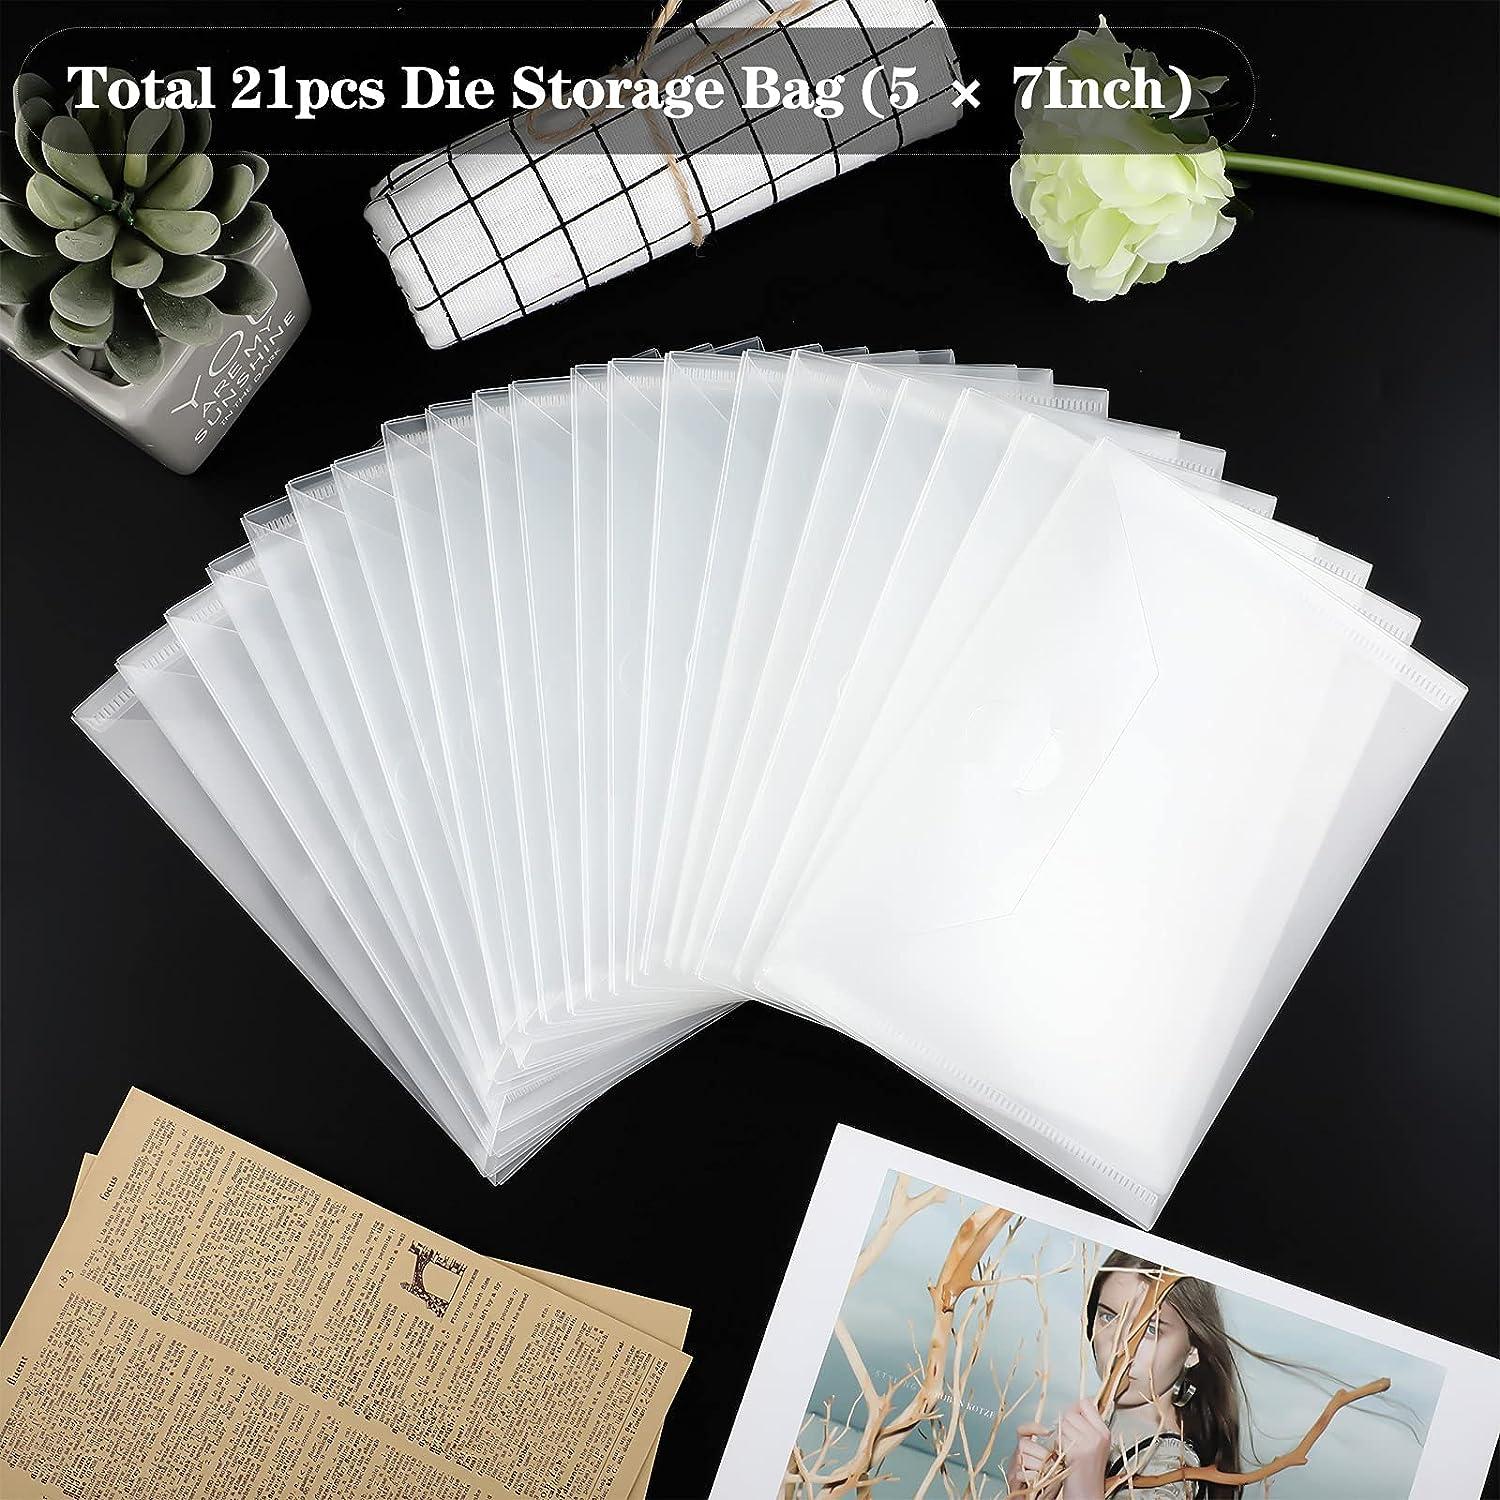 21 Pieces Clear Stamp and Die Storage Pockets Die Cut Storage Bag  Scrapbooking Storage Die Storage Envelopes for DIY Card Making (5 x 7 Inch)